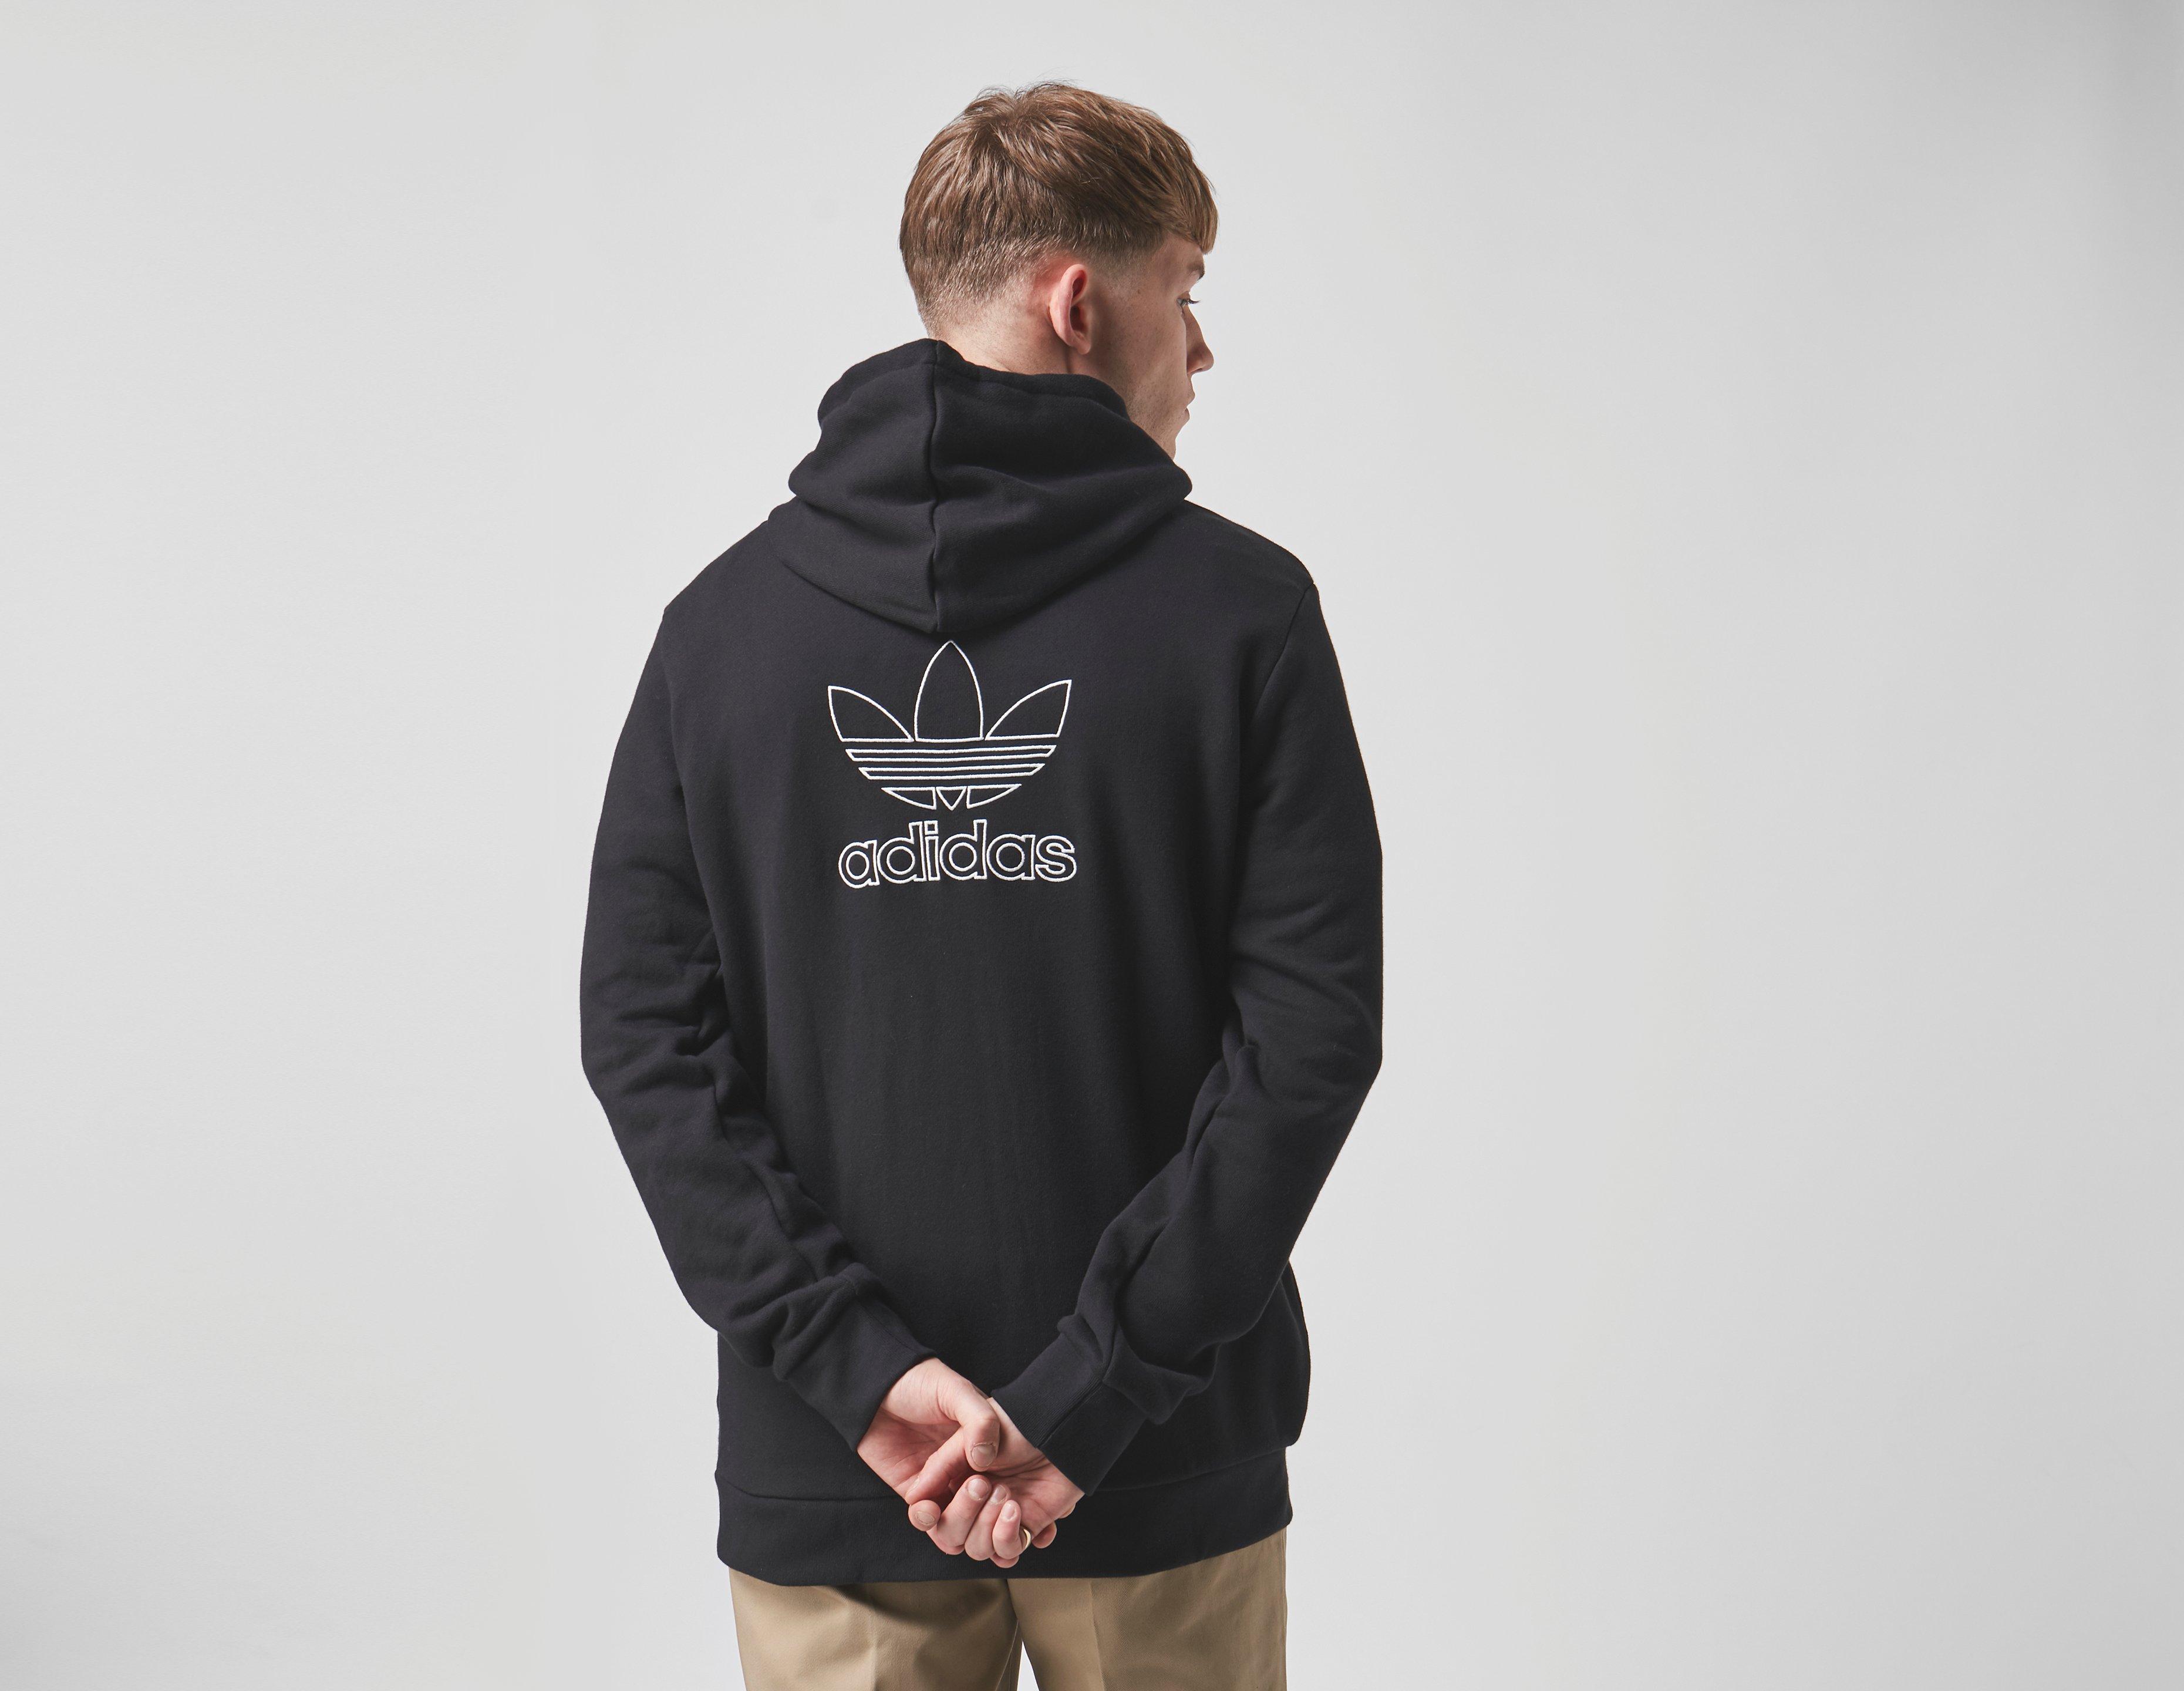 adidas hoodie with logo on back